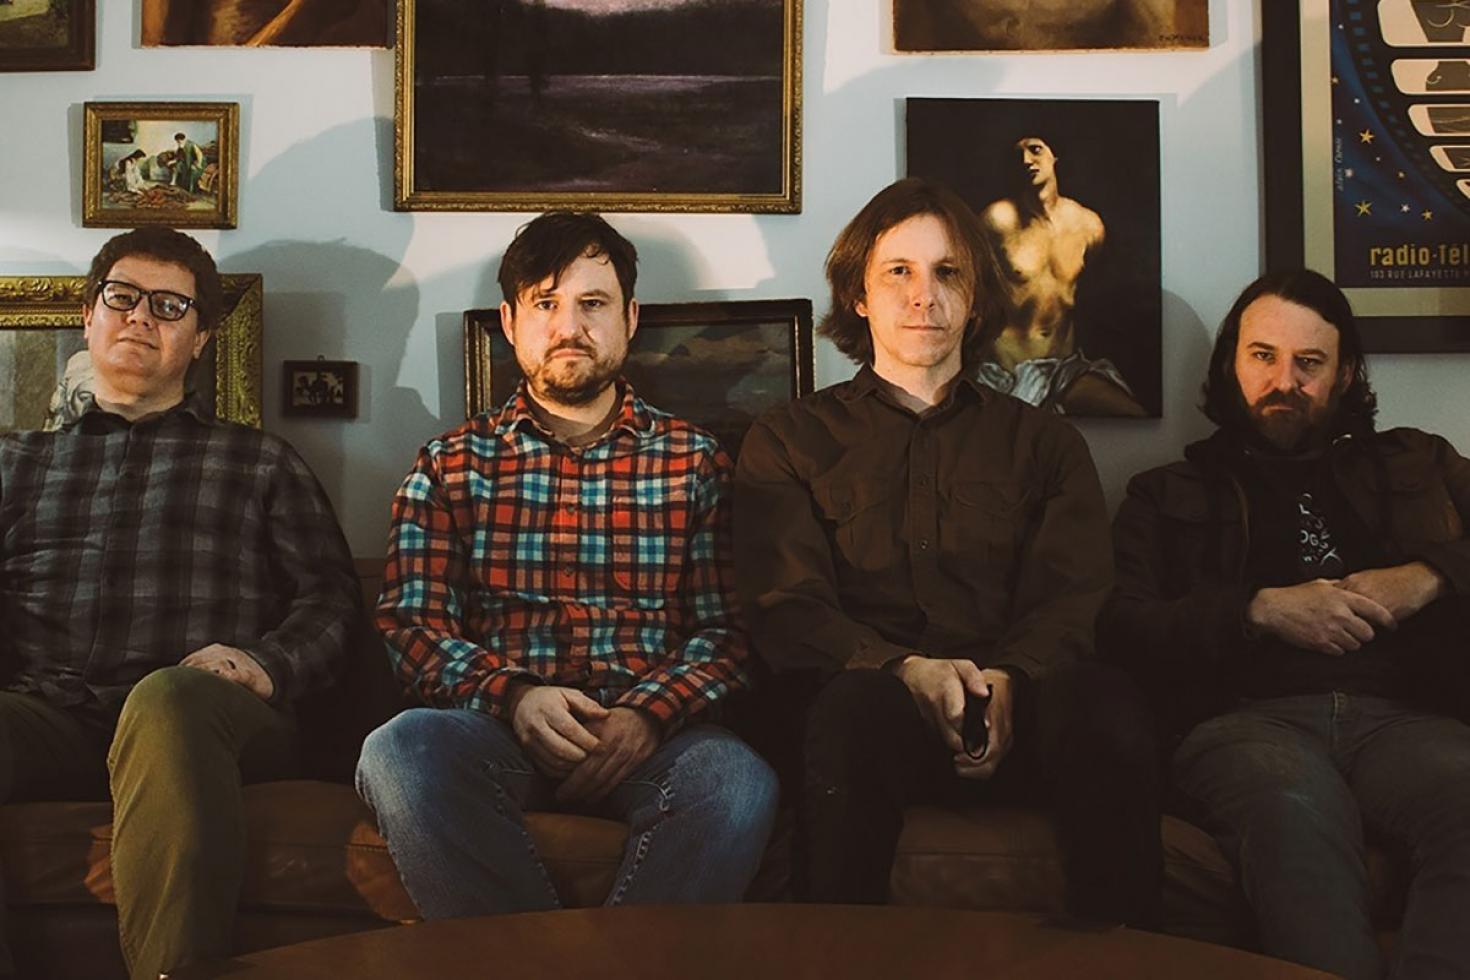 PREMIERE: Oh Condor share video for new single ‘Colors Collapse’